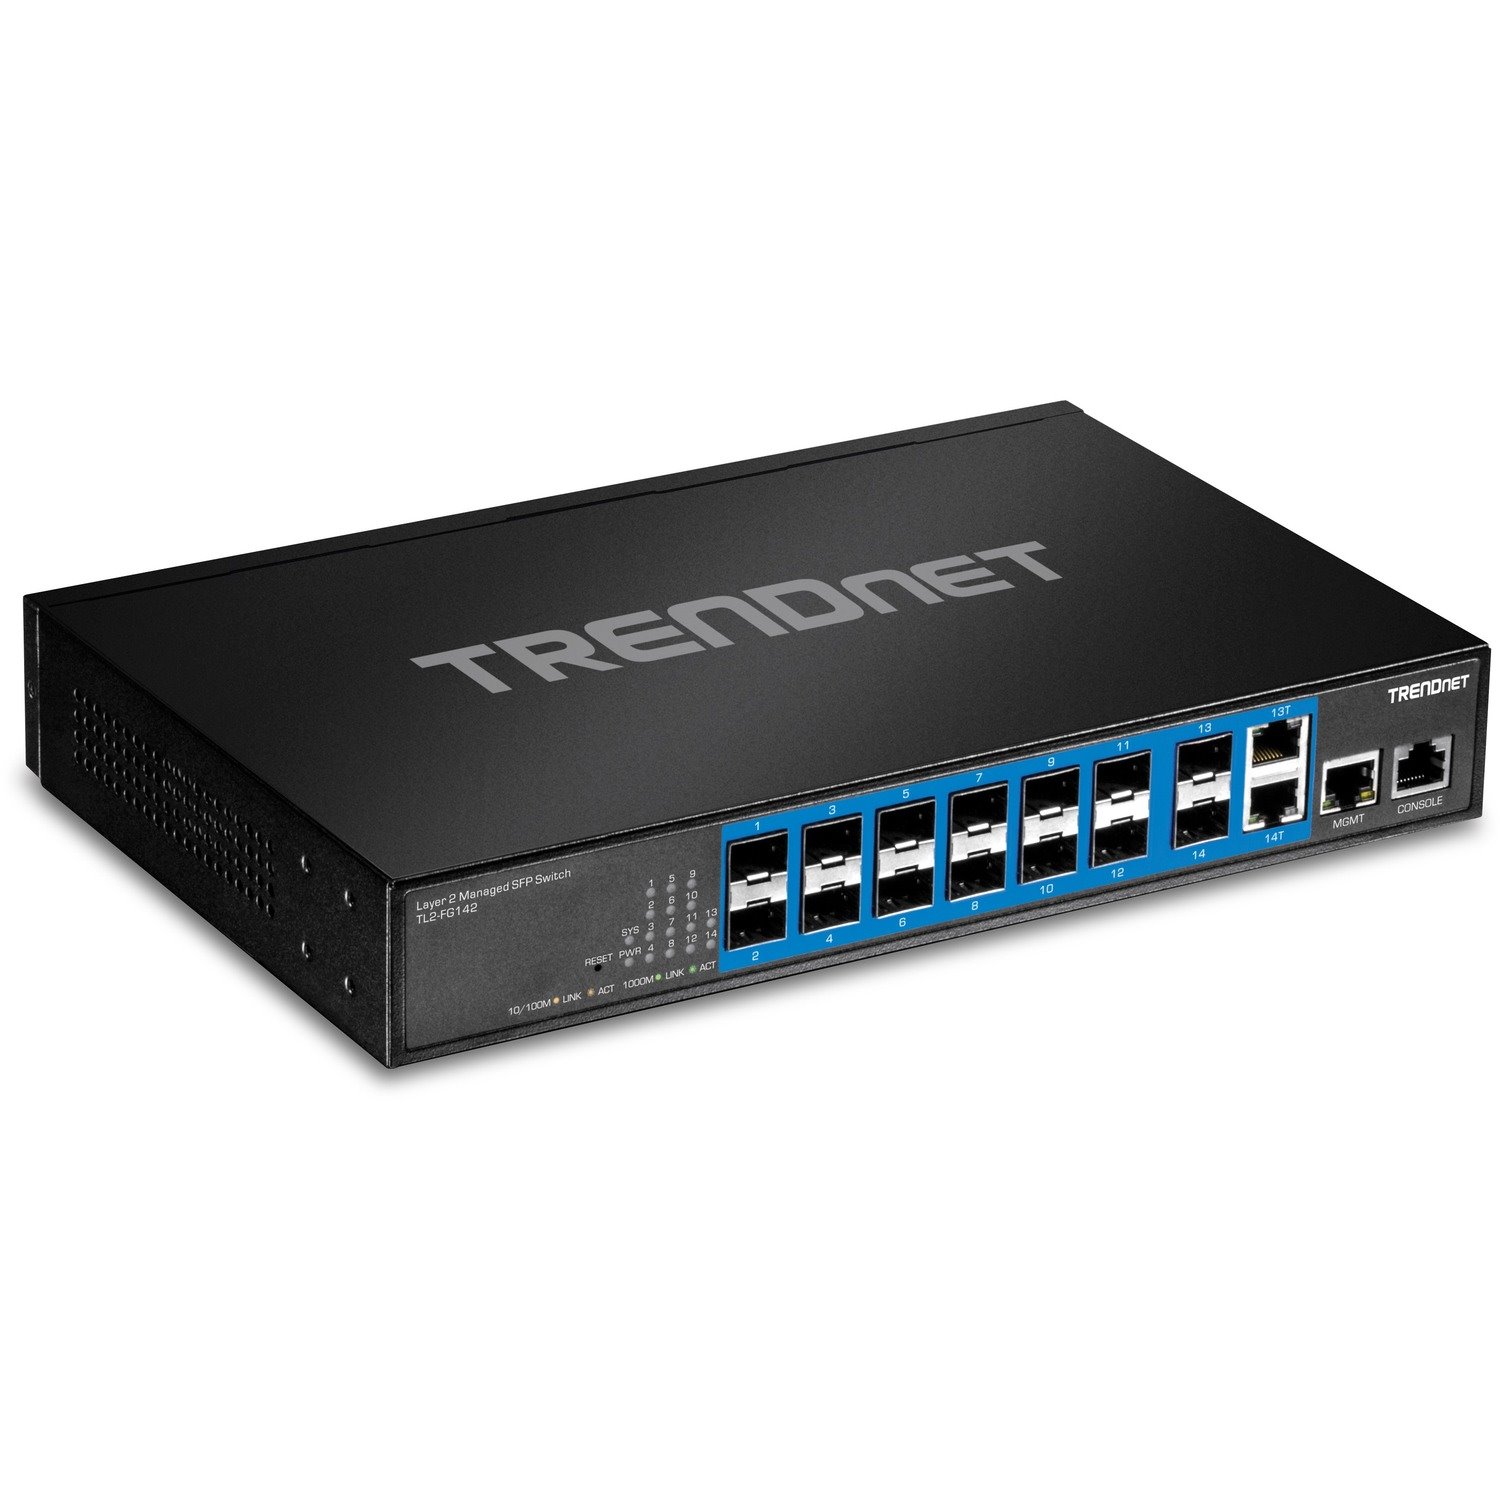 TRENDnet 14-Port Gigabit Managed Layer 2 SFP Switch; TL2-FG142; 2 Shared Gigabit RJ-45 Ports; 12 x SFP Slots 100/1000Mbps; 28Gbps Switching Capacity; VLAN; QoS; LACP; IPv6 Support; Lifetime Protection